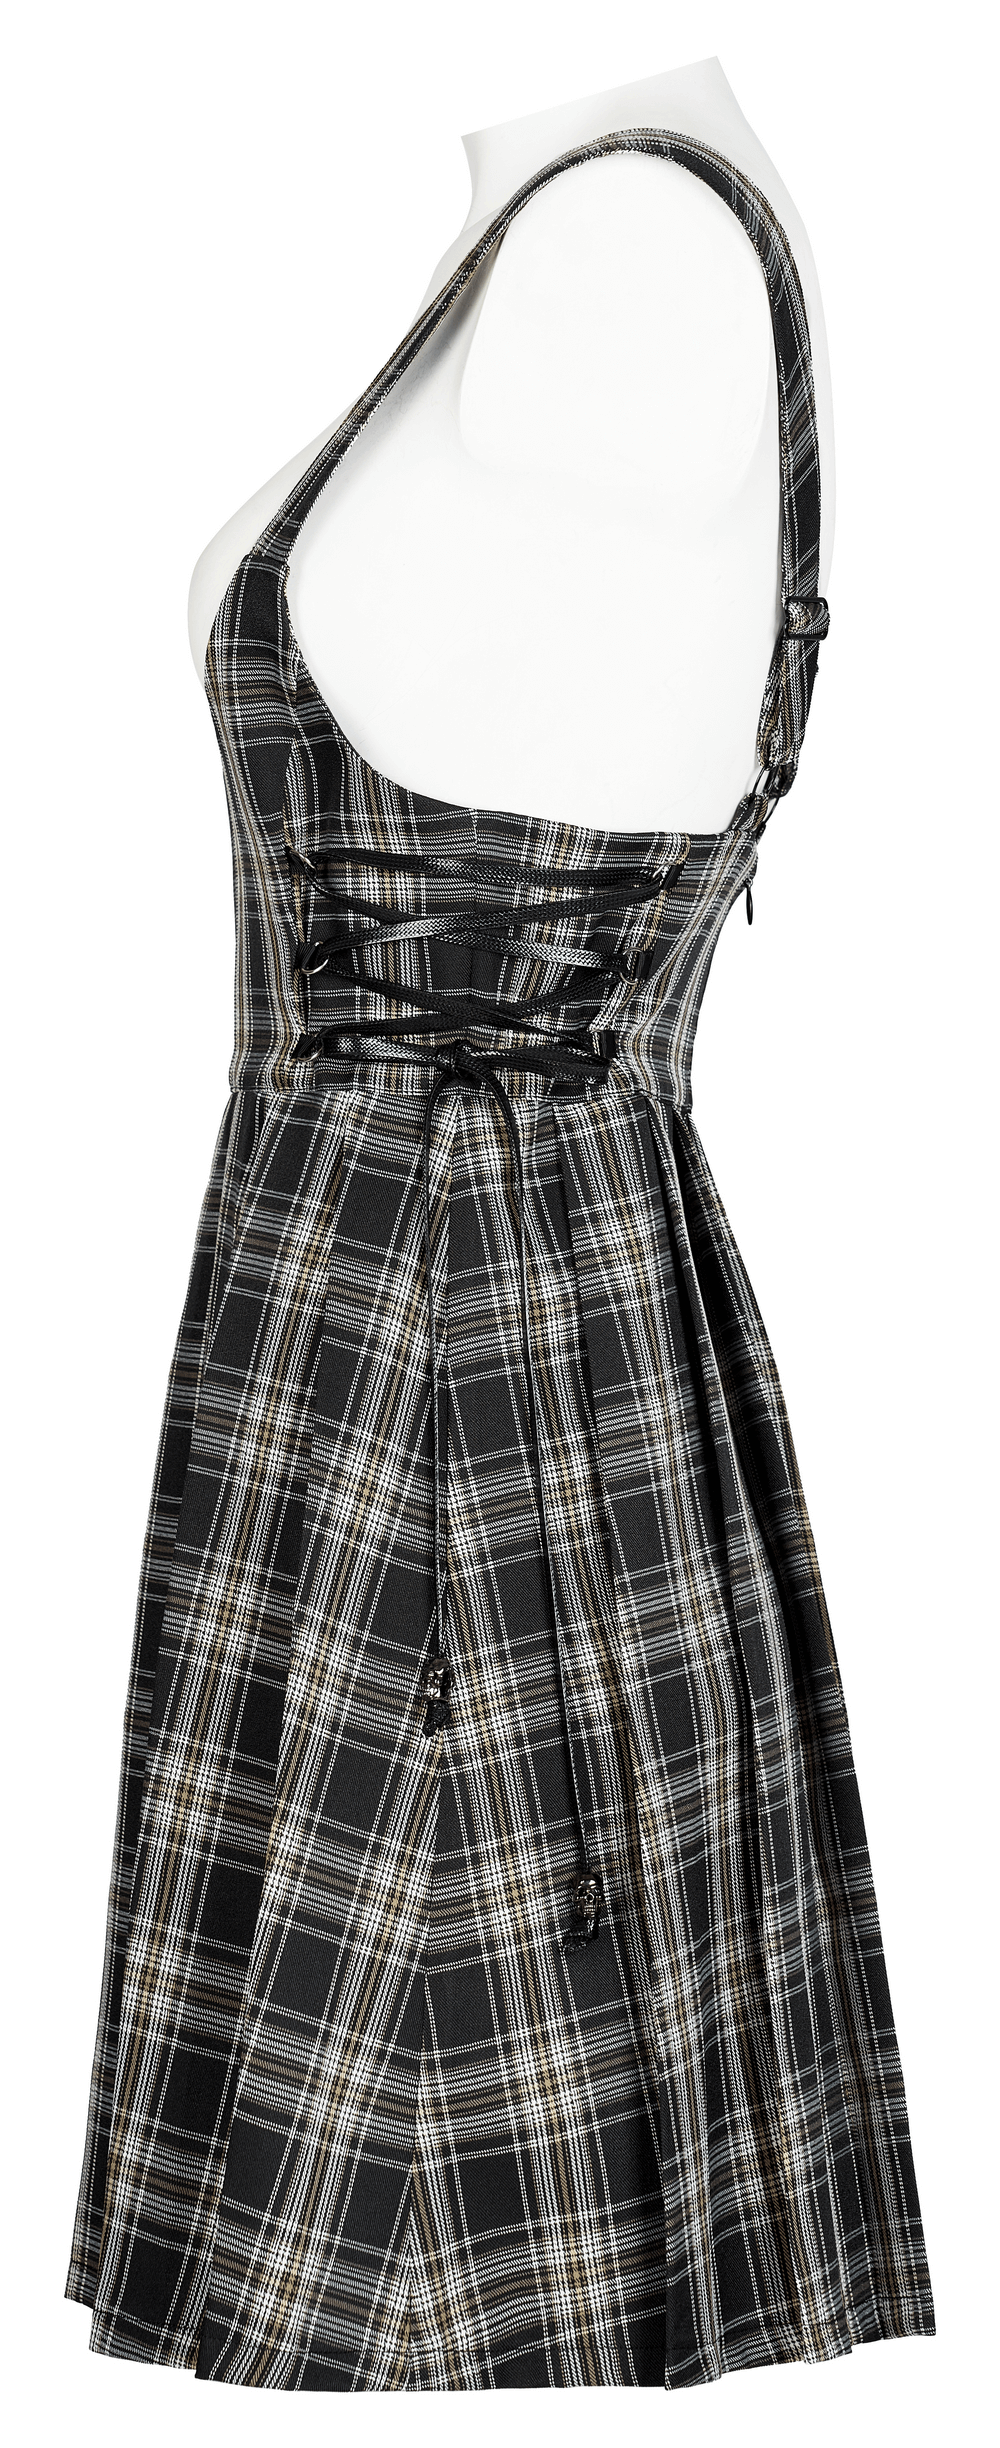 Chic Plaid Pleated Mini Dress with Strap Detail